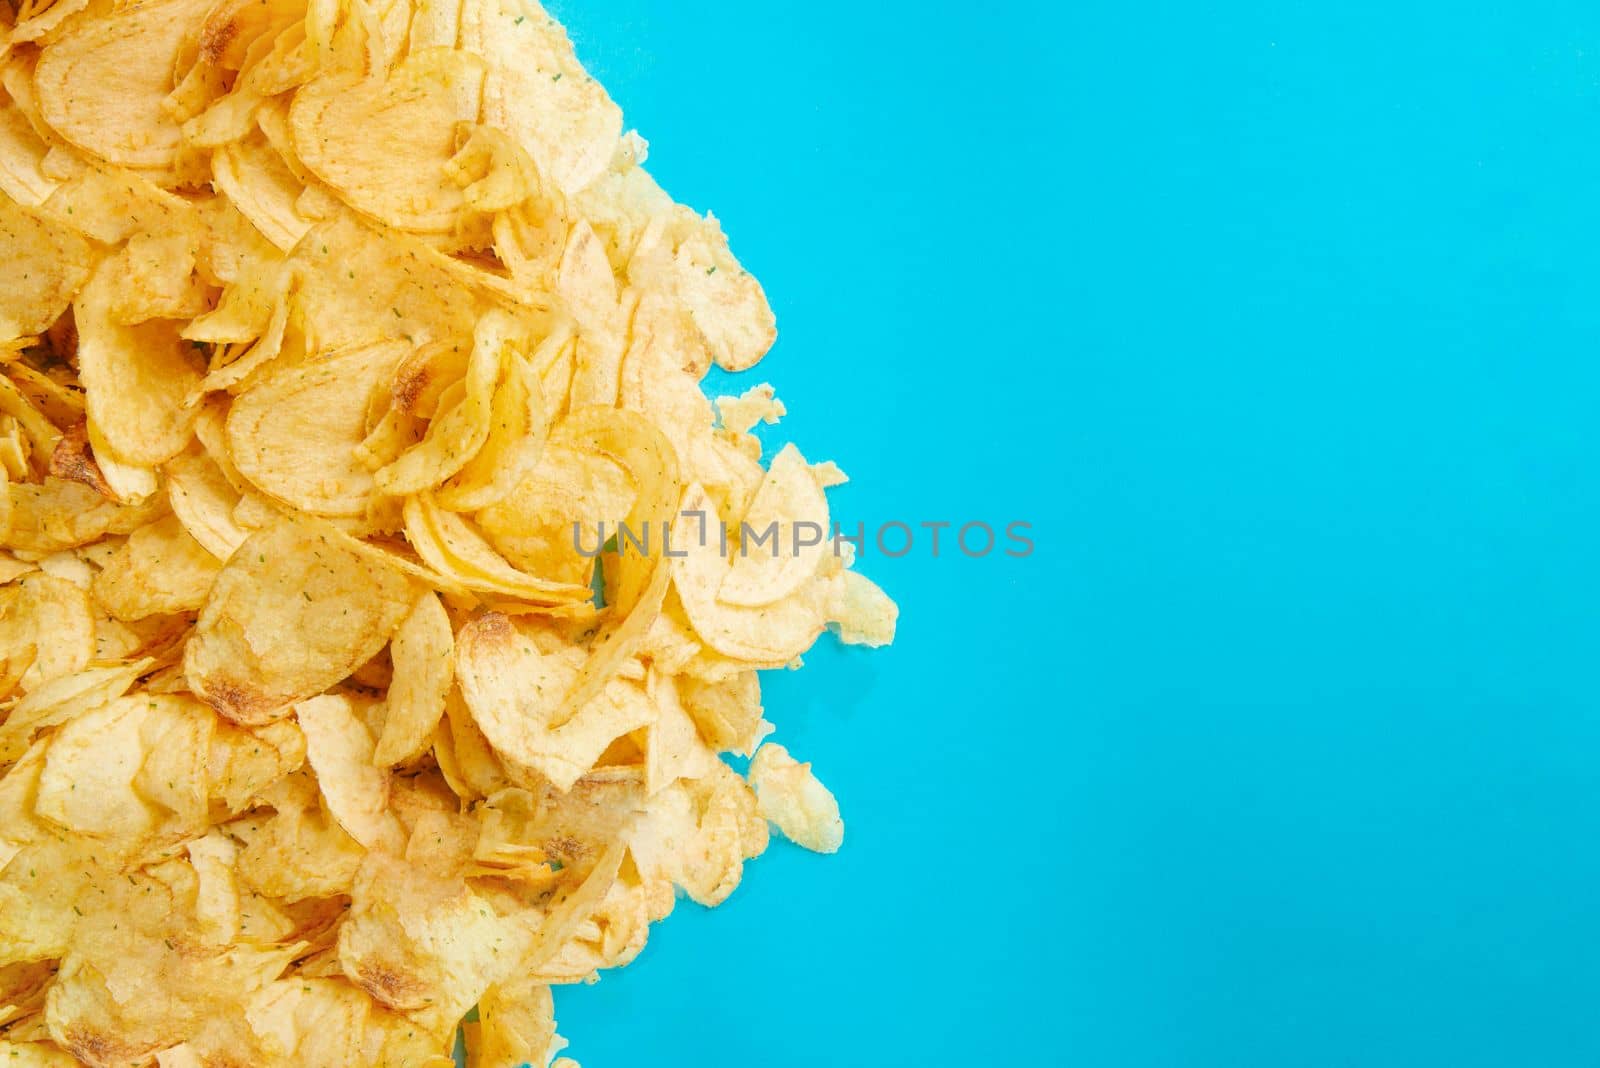 Fried foods are bad for your health. Healthy Eating. Chips, fried potatoes. Unhealthy foods. Blank space for text. Harmful food. Fried potatoes and chips on a blue background. Fried food is bad for your health. by gulyaevstudio